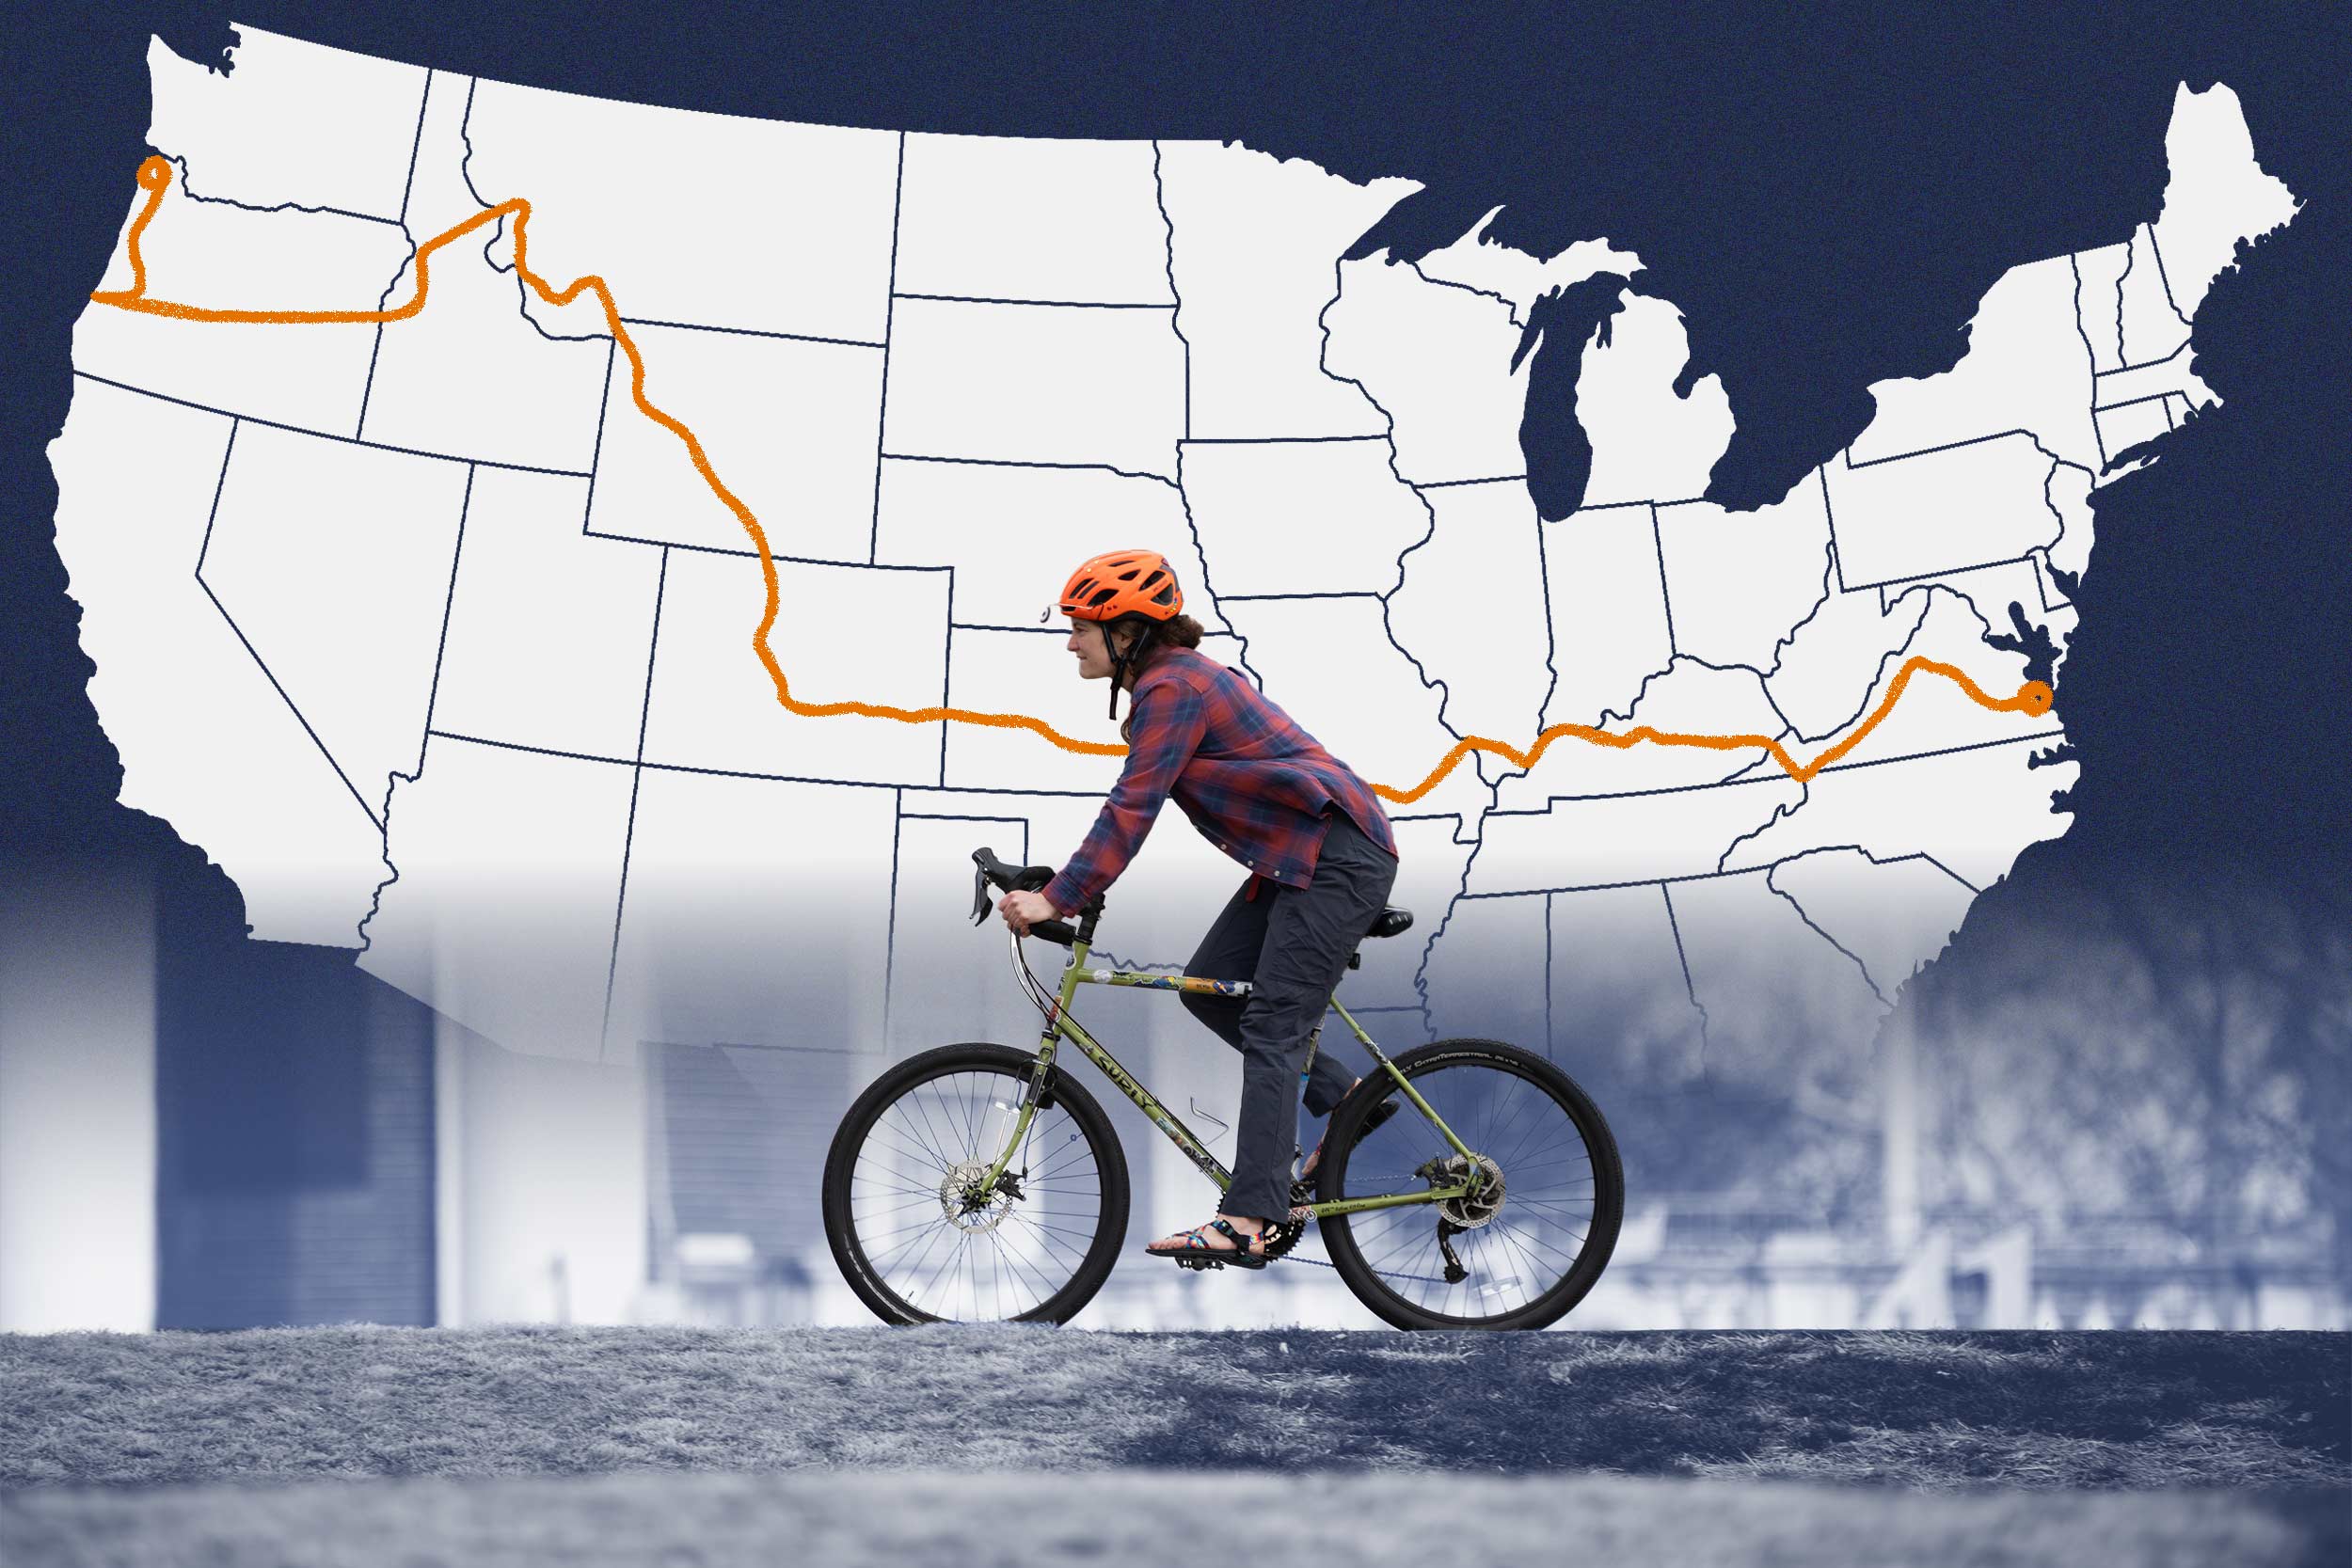 This Student's Cross Country Bike Trip Builds Goodness, One Pedal Stroke at  a Time